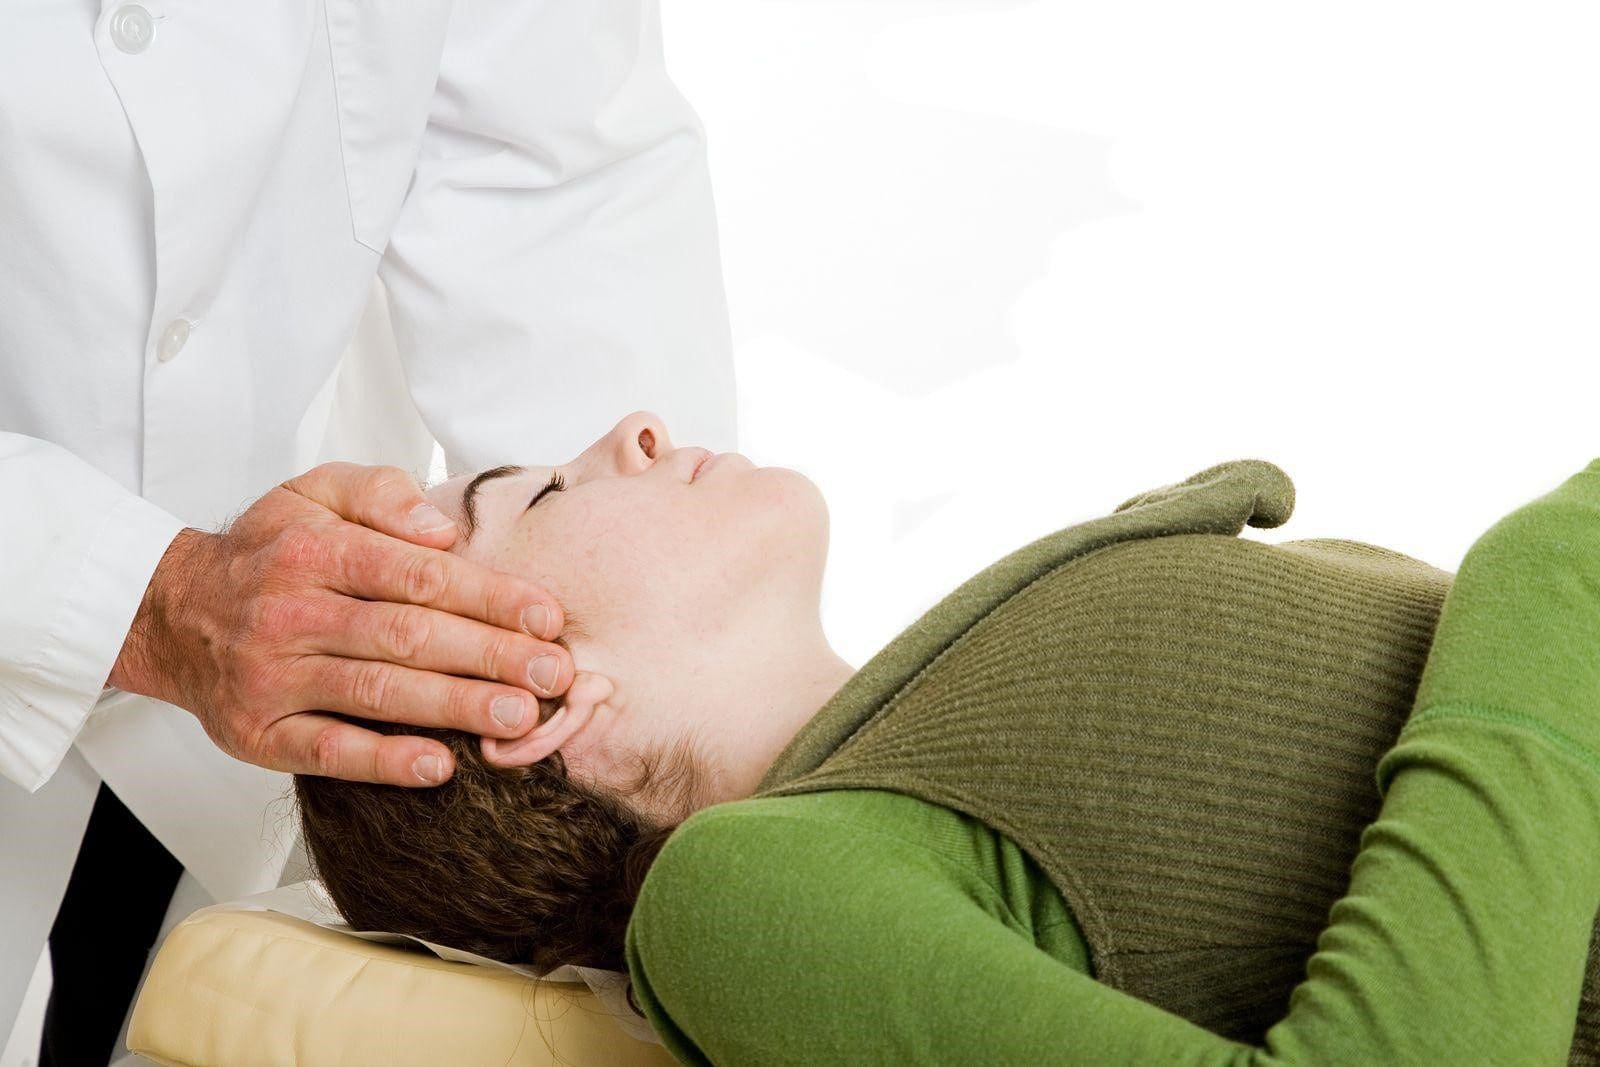 A woman is laying on a chirpractic table and being treated for migraines by a chiropractor.